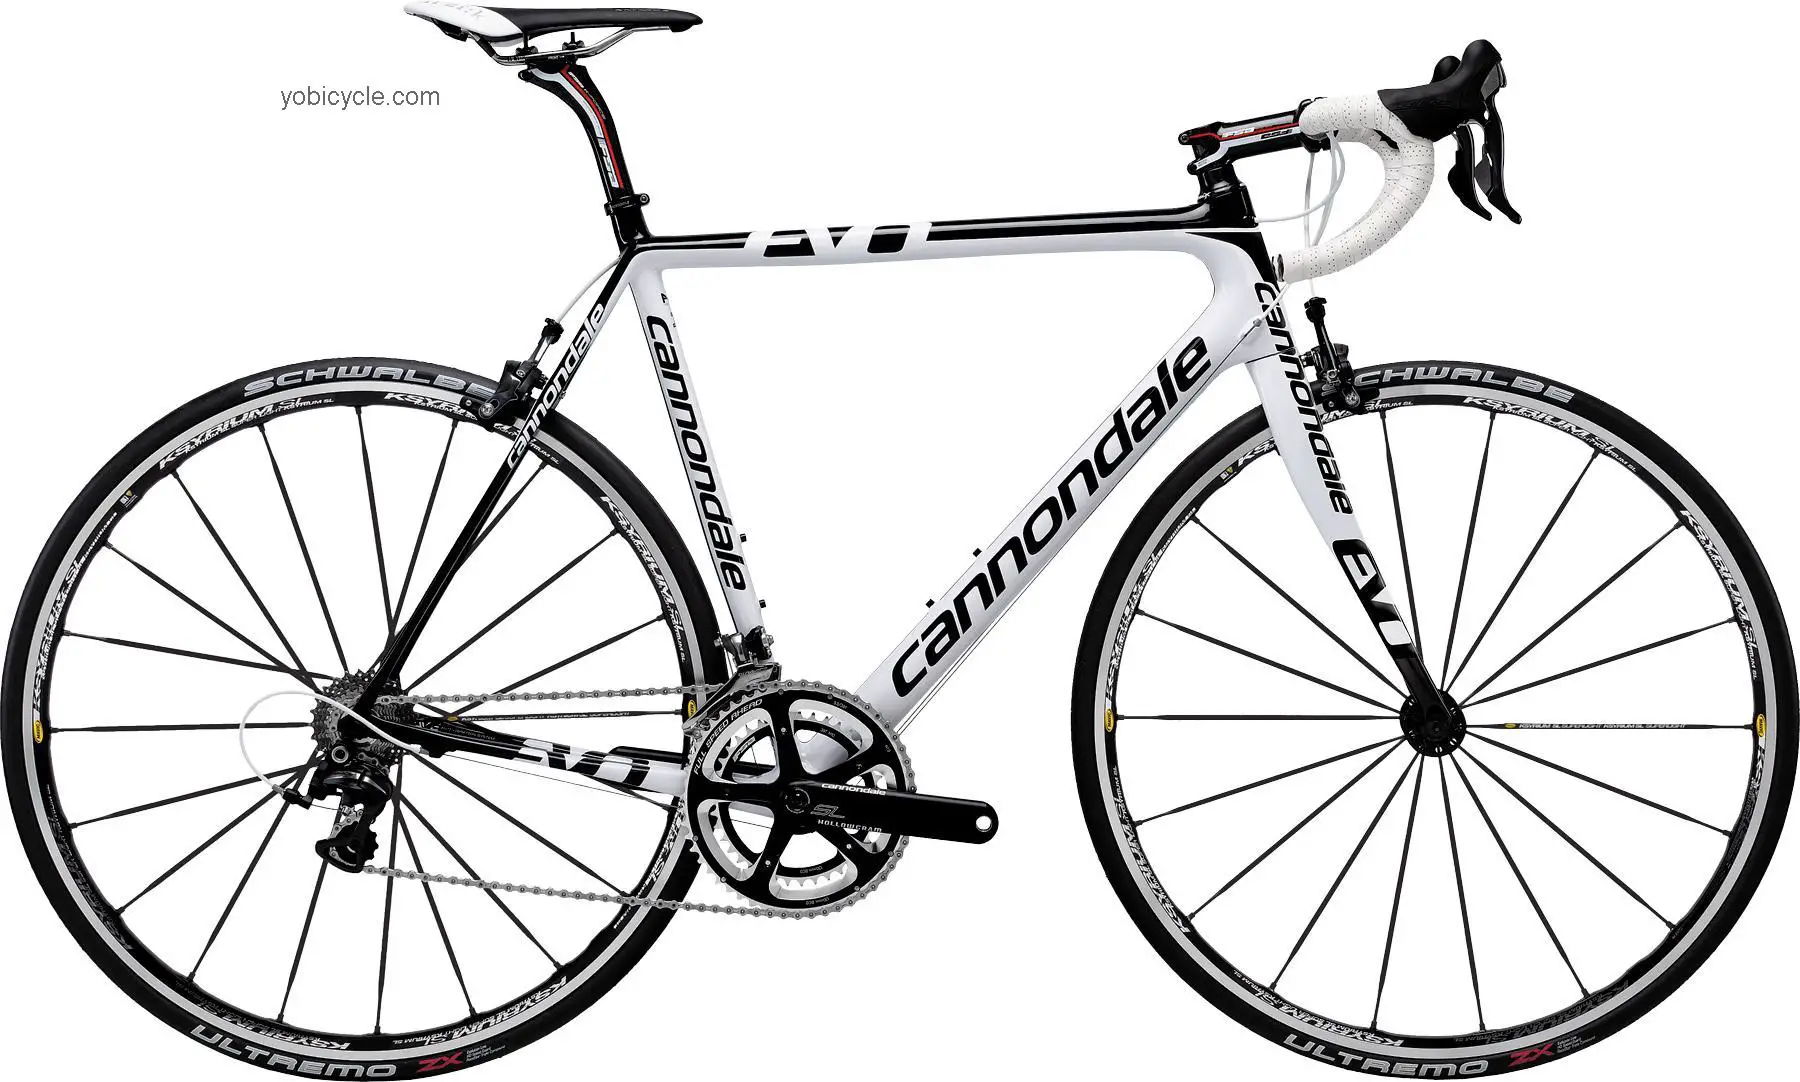 Cannondale Super Six EVO 1 Dura-Ace competitors and comparison tool online specs and performance